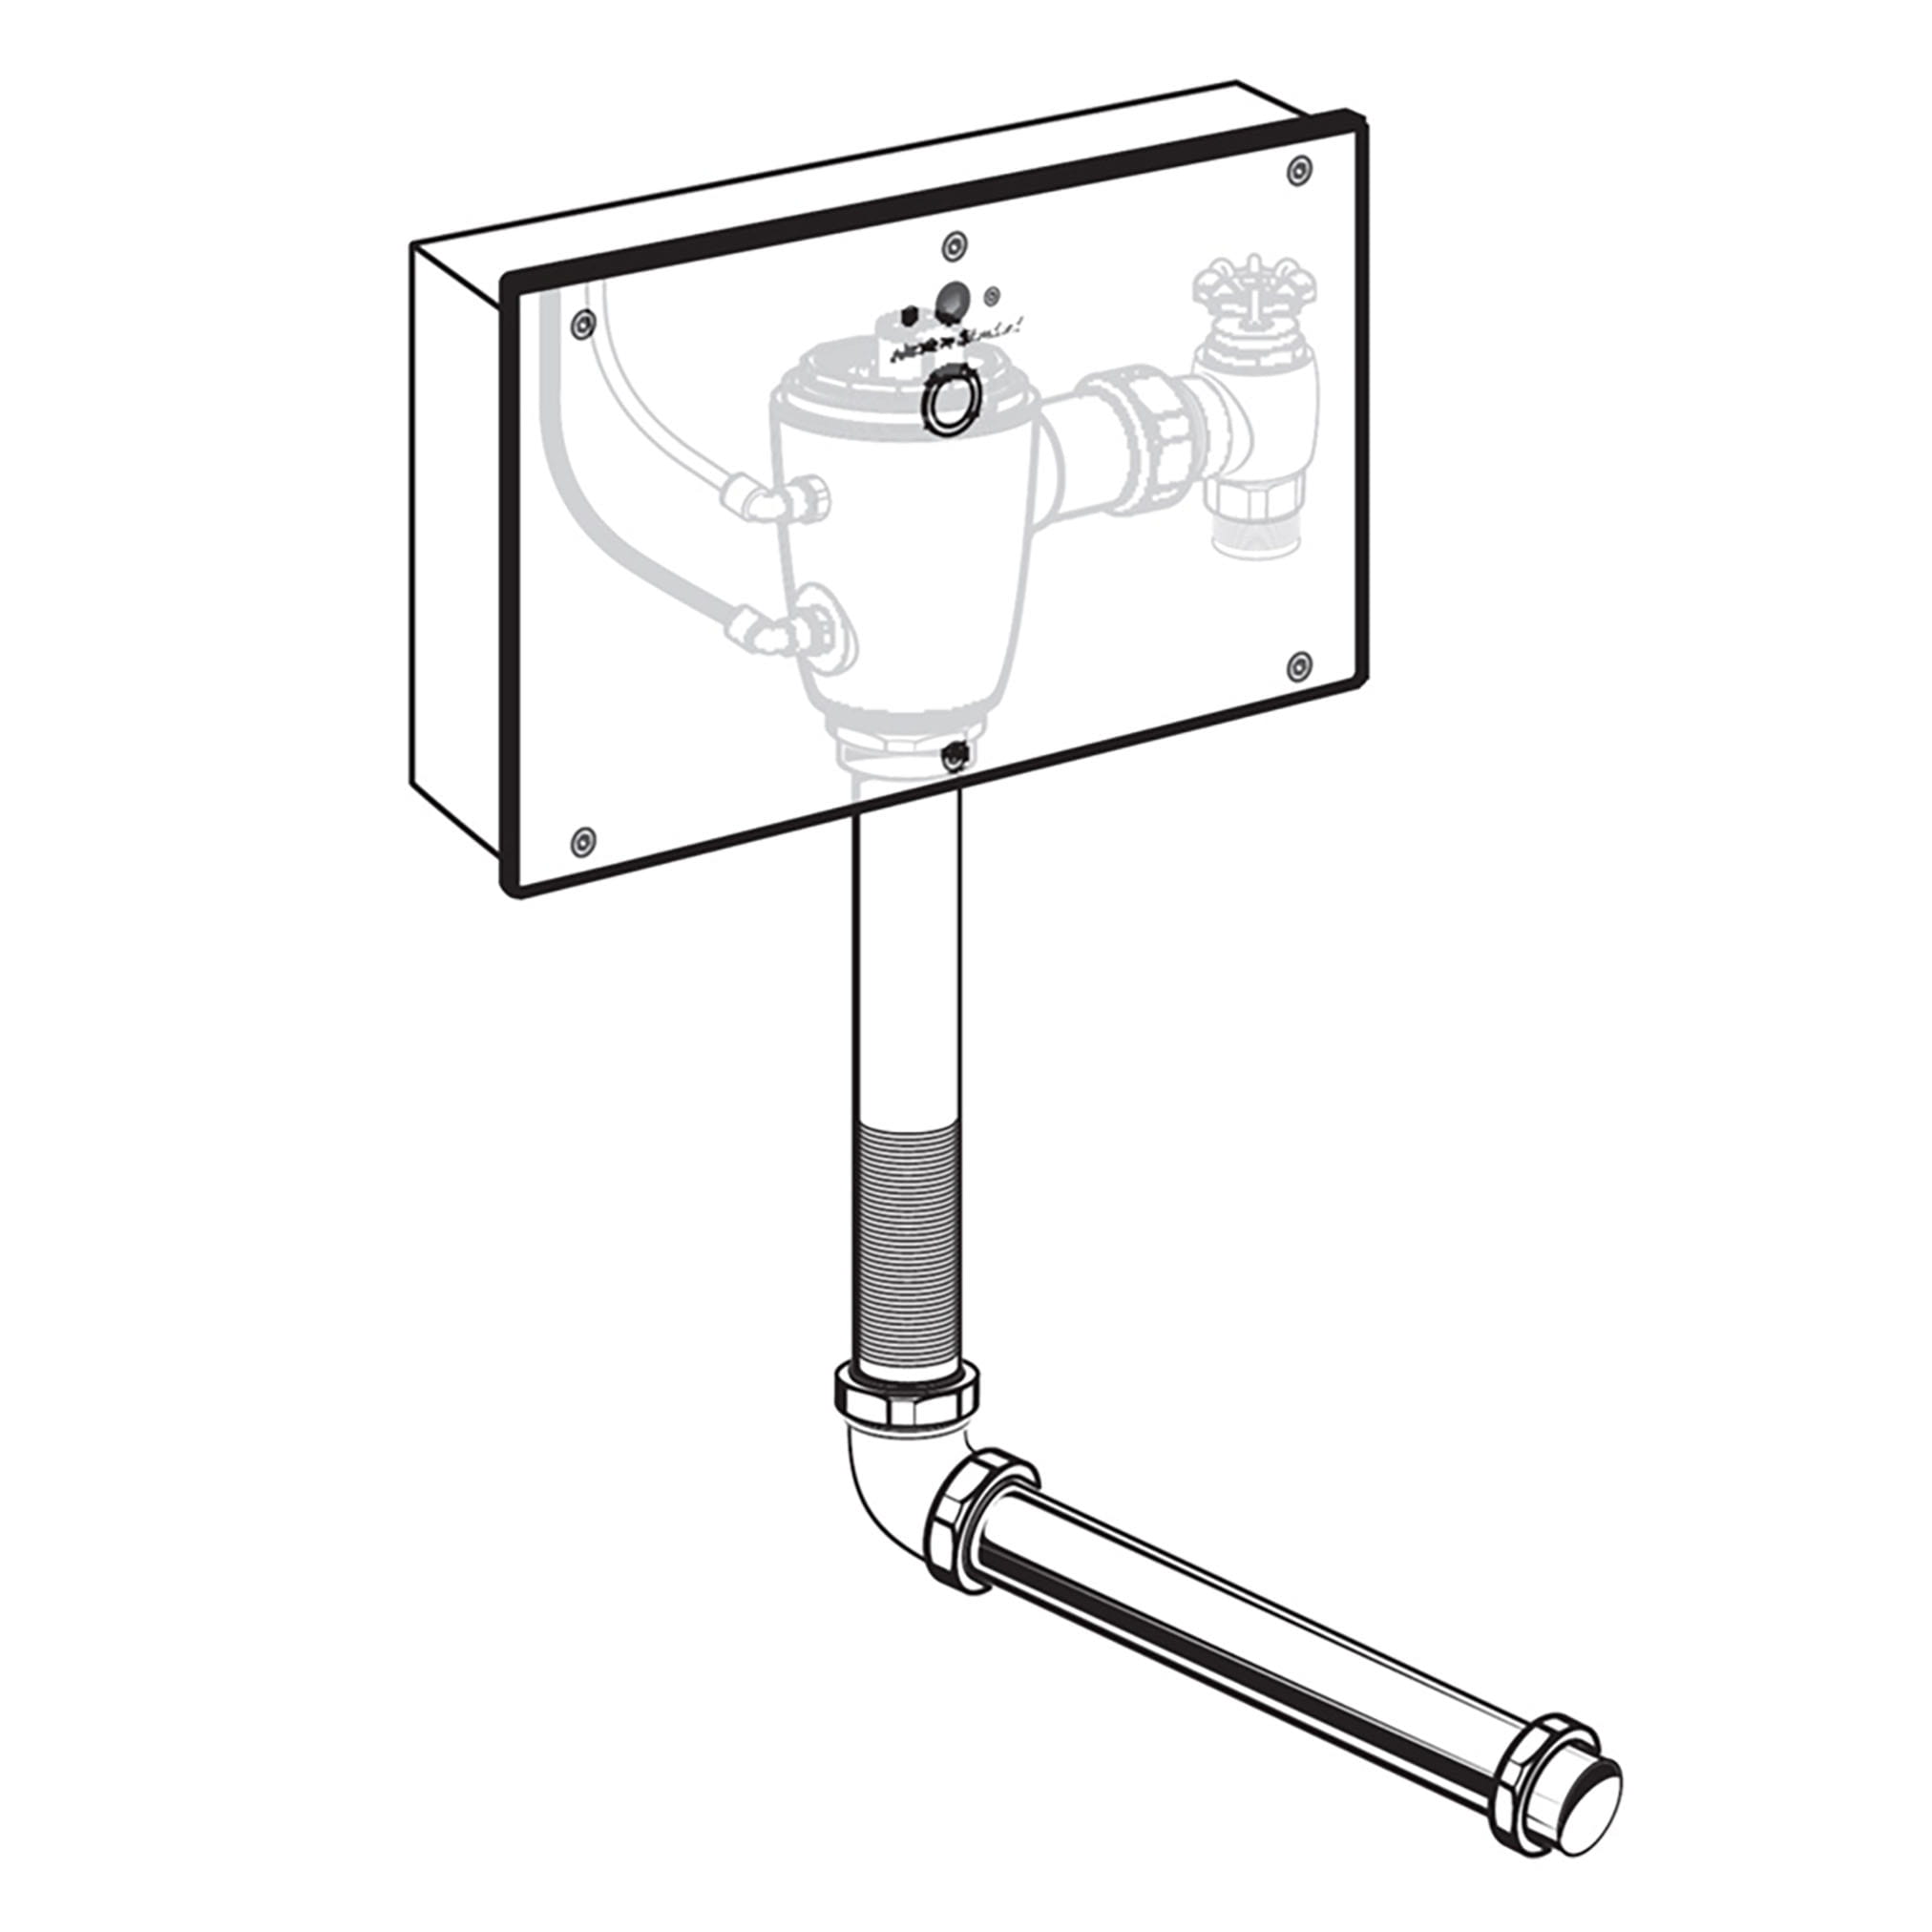 Ultima™ Selectronic Concealed Toilet Flush Valve with Wall Box, Base Model, Piston-Type, 1.1 gpf/4.2 Lpf